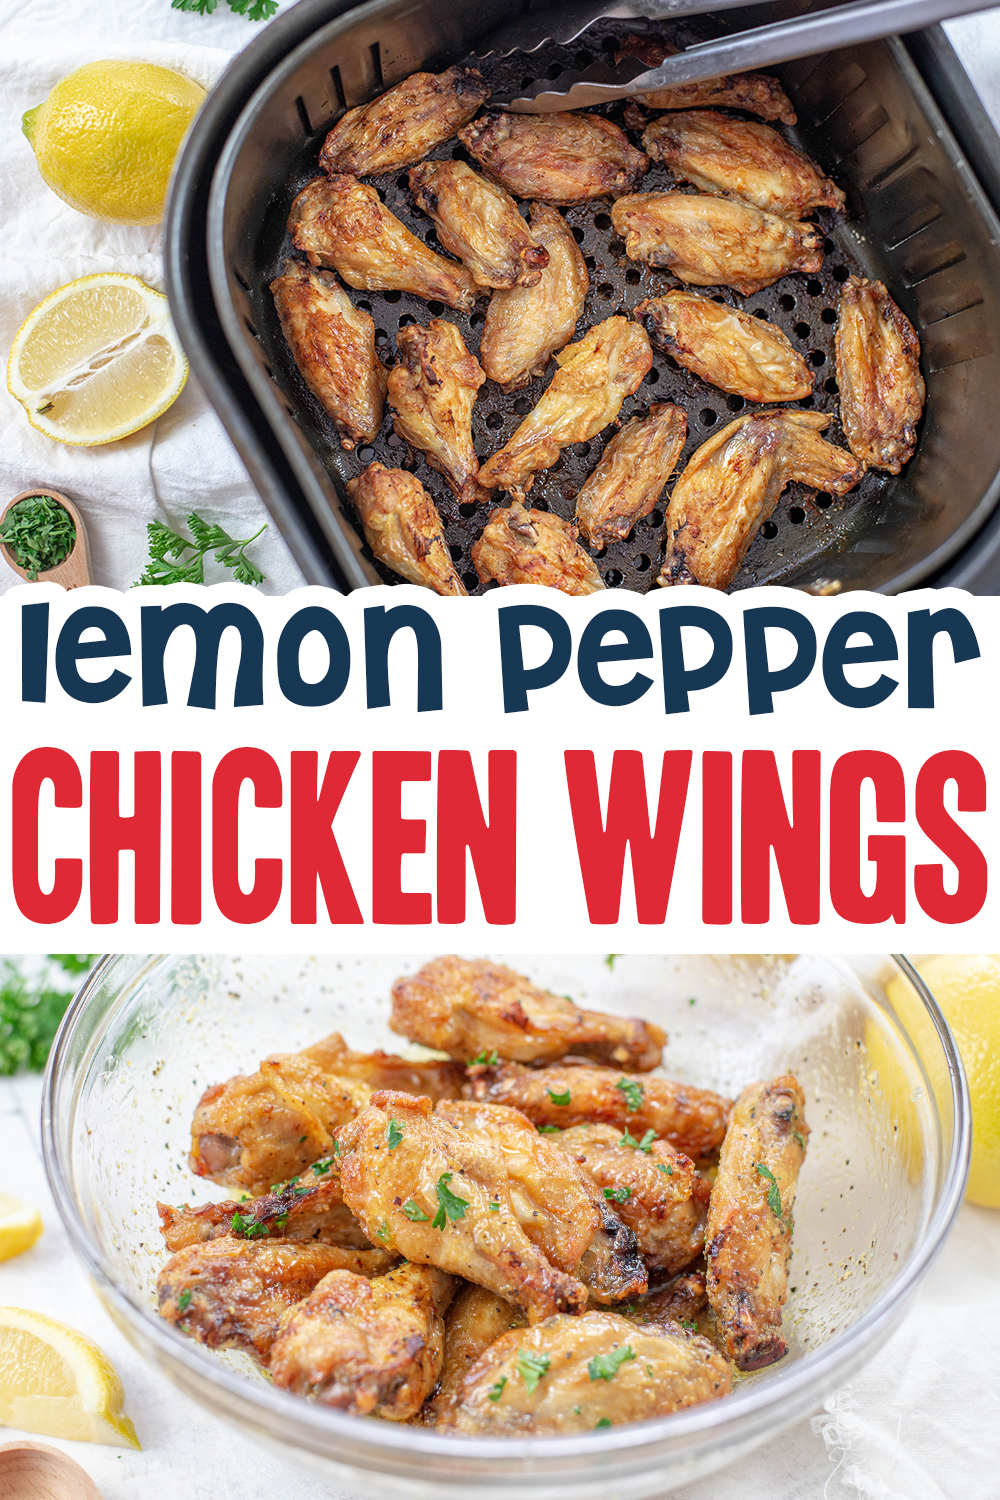 The air fryer can cook crispy chicken wings with perfection every time!  Add this lemon pepper coating for a perfect mild flavor!